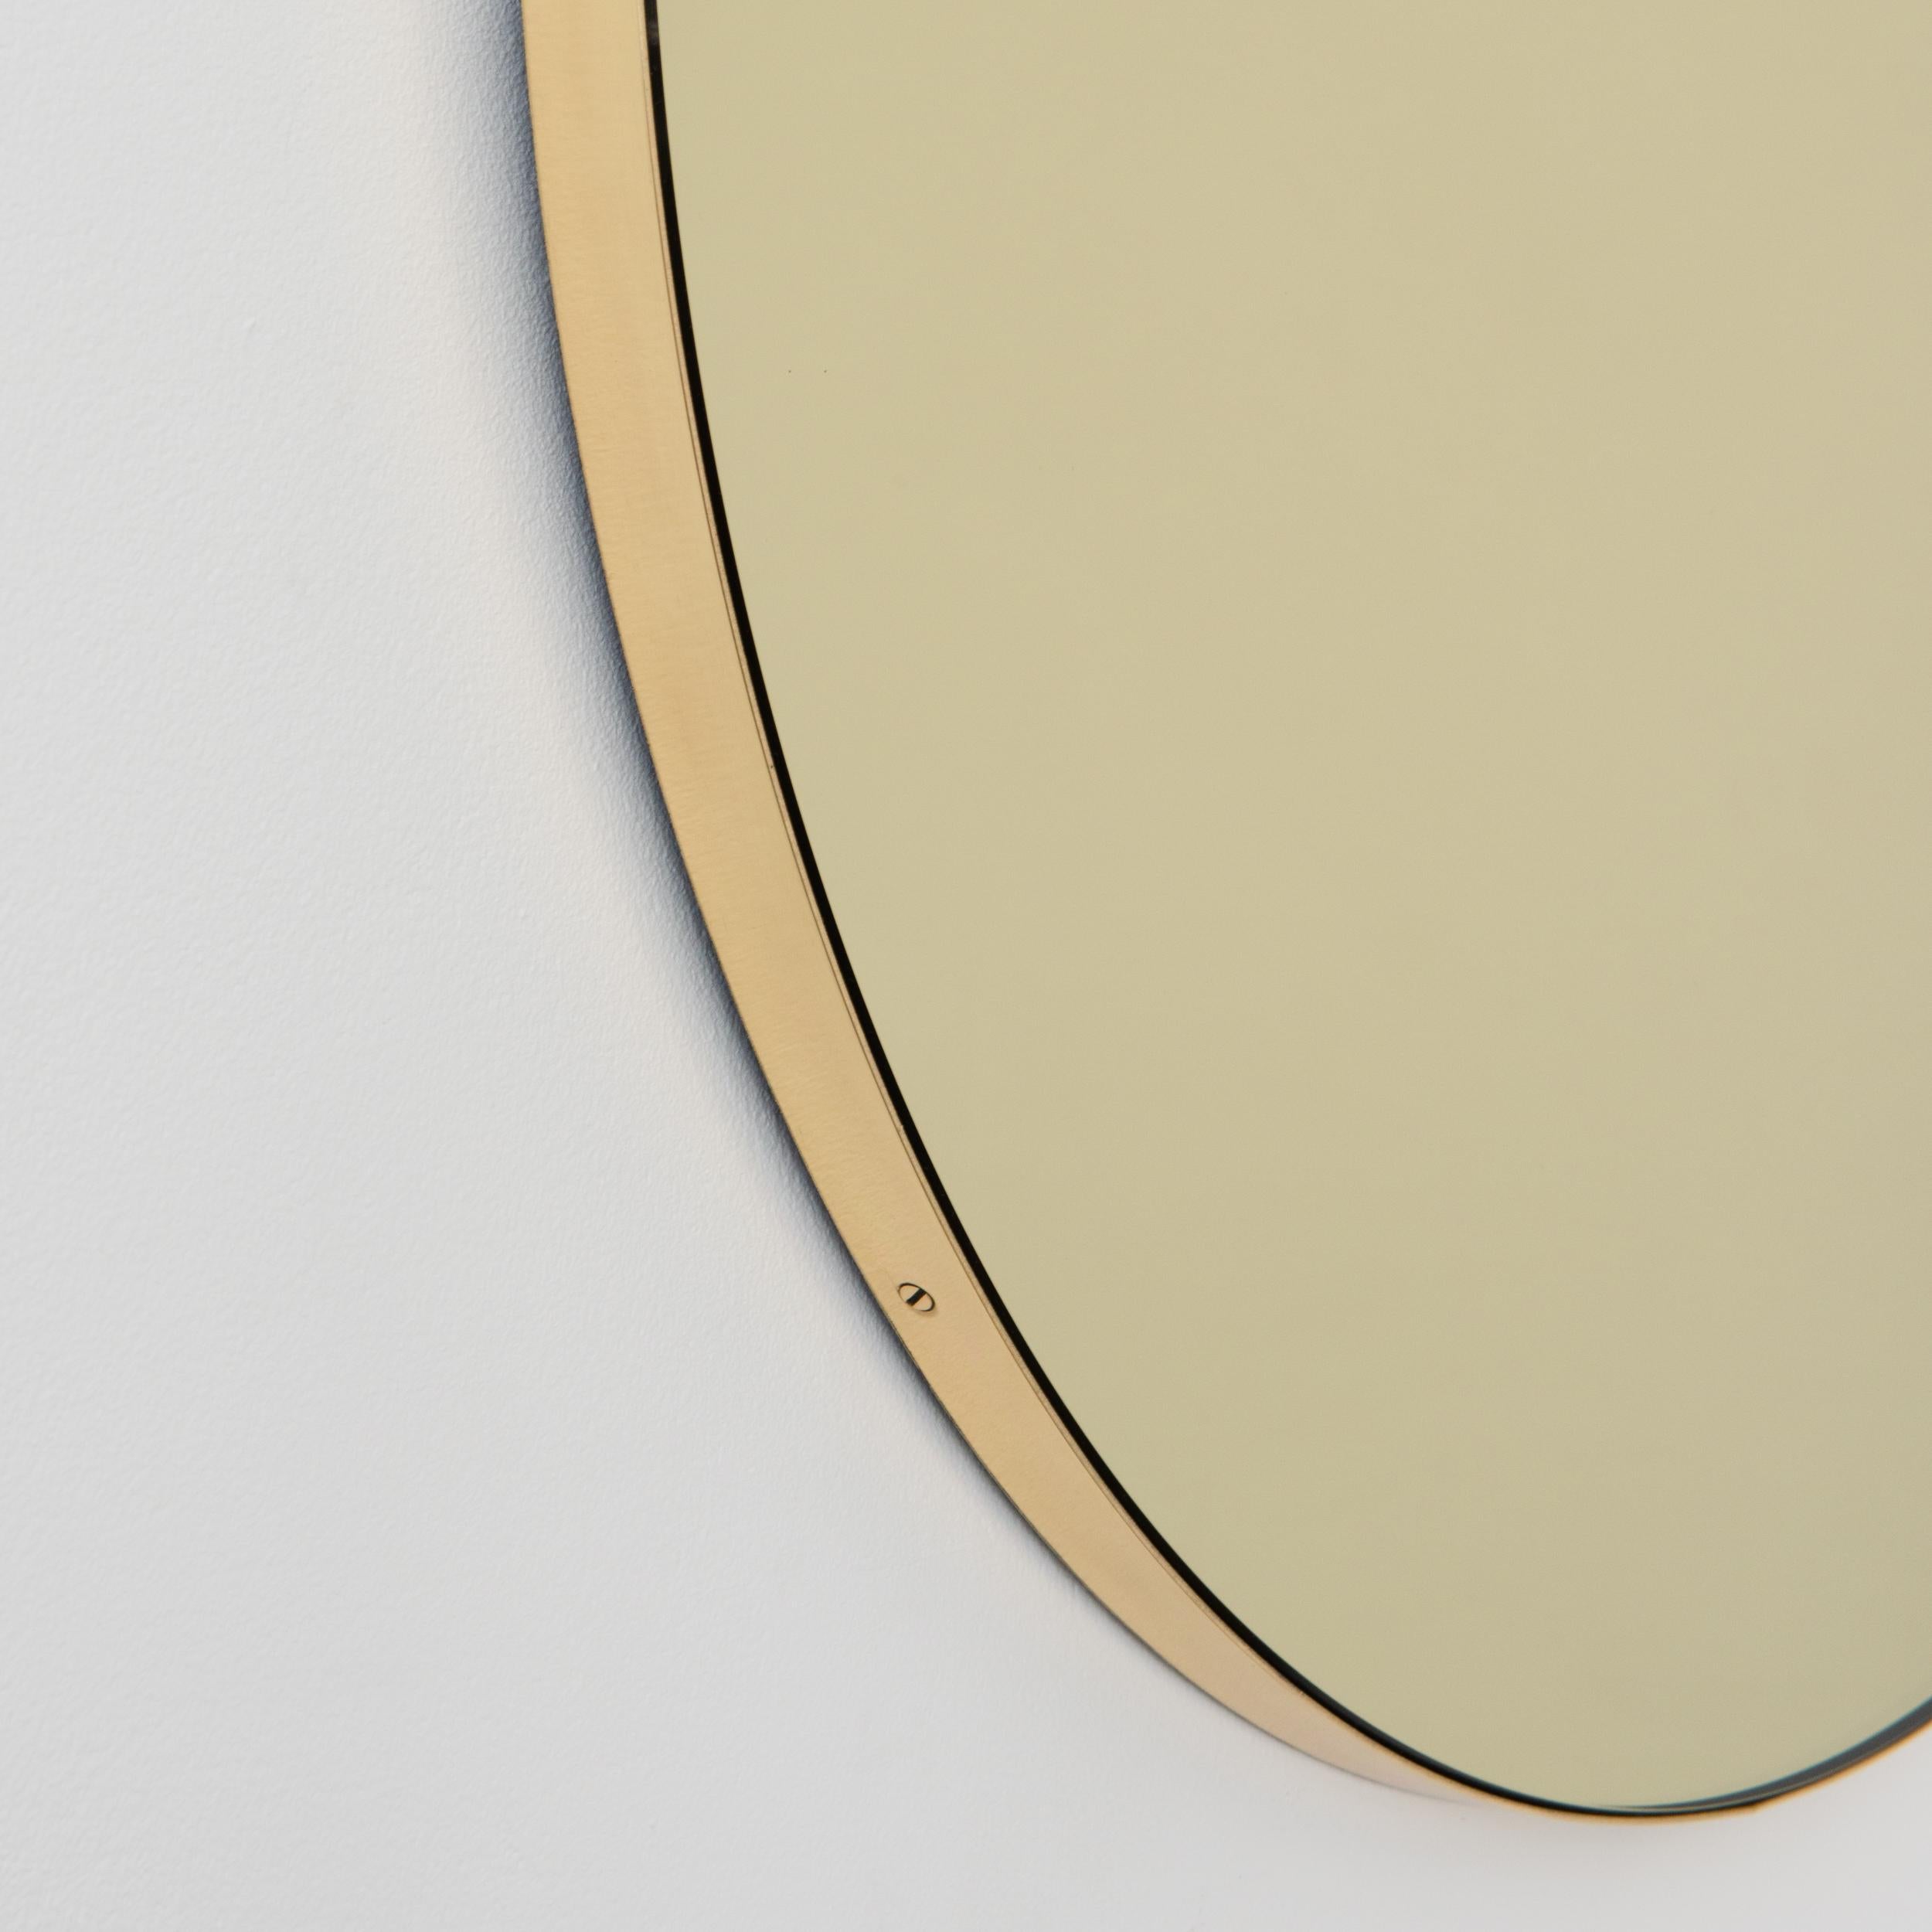 Organic Modern Orbis Gold Tinted Round Modern Mirror with Brushed Brass Frame, Large For Sale